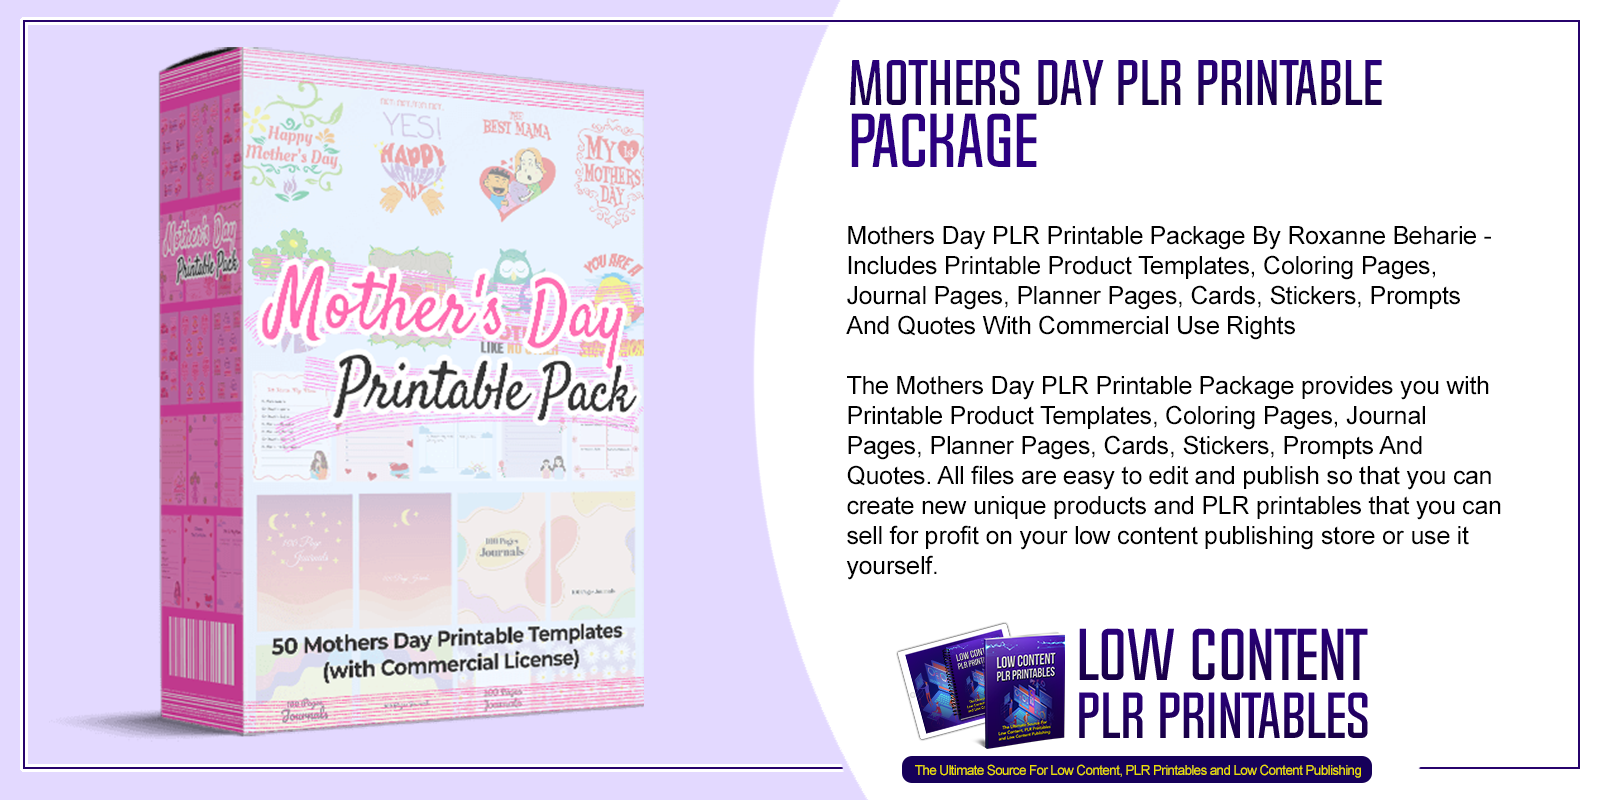 Mothers Day PLR Printable Package